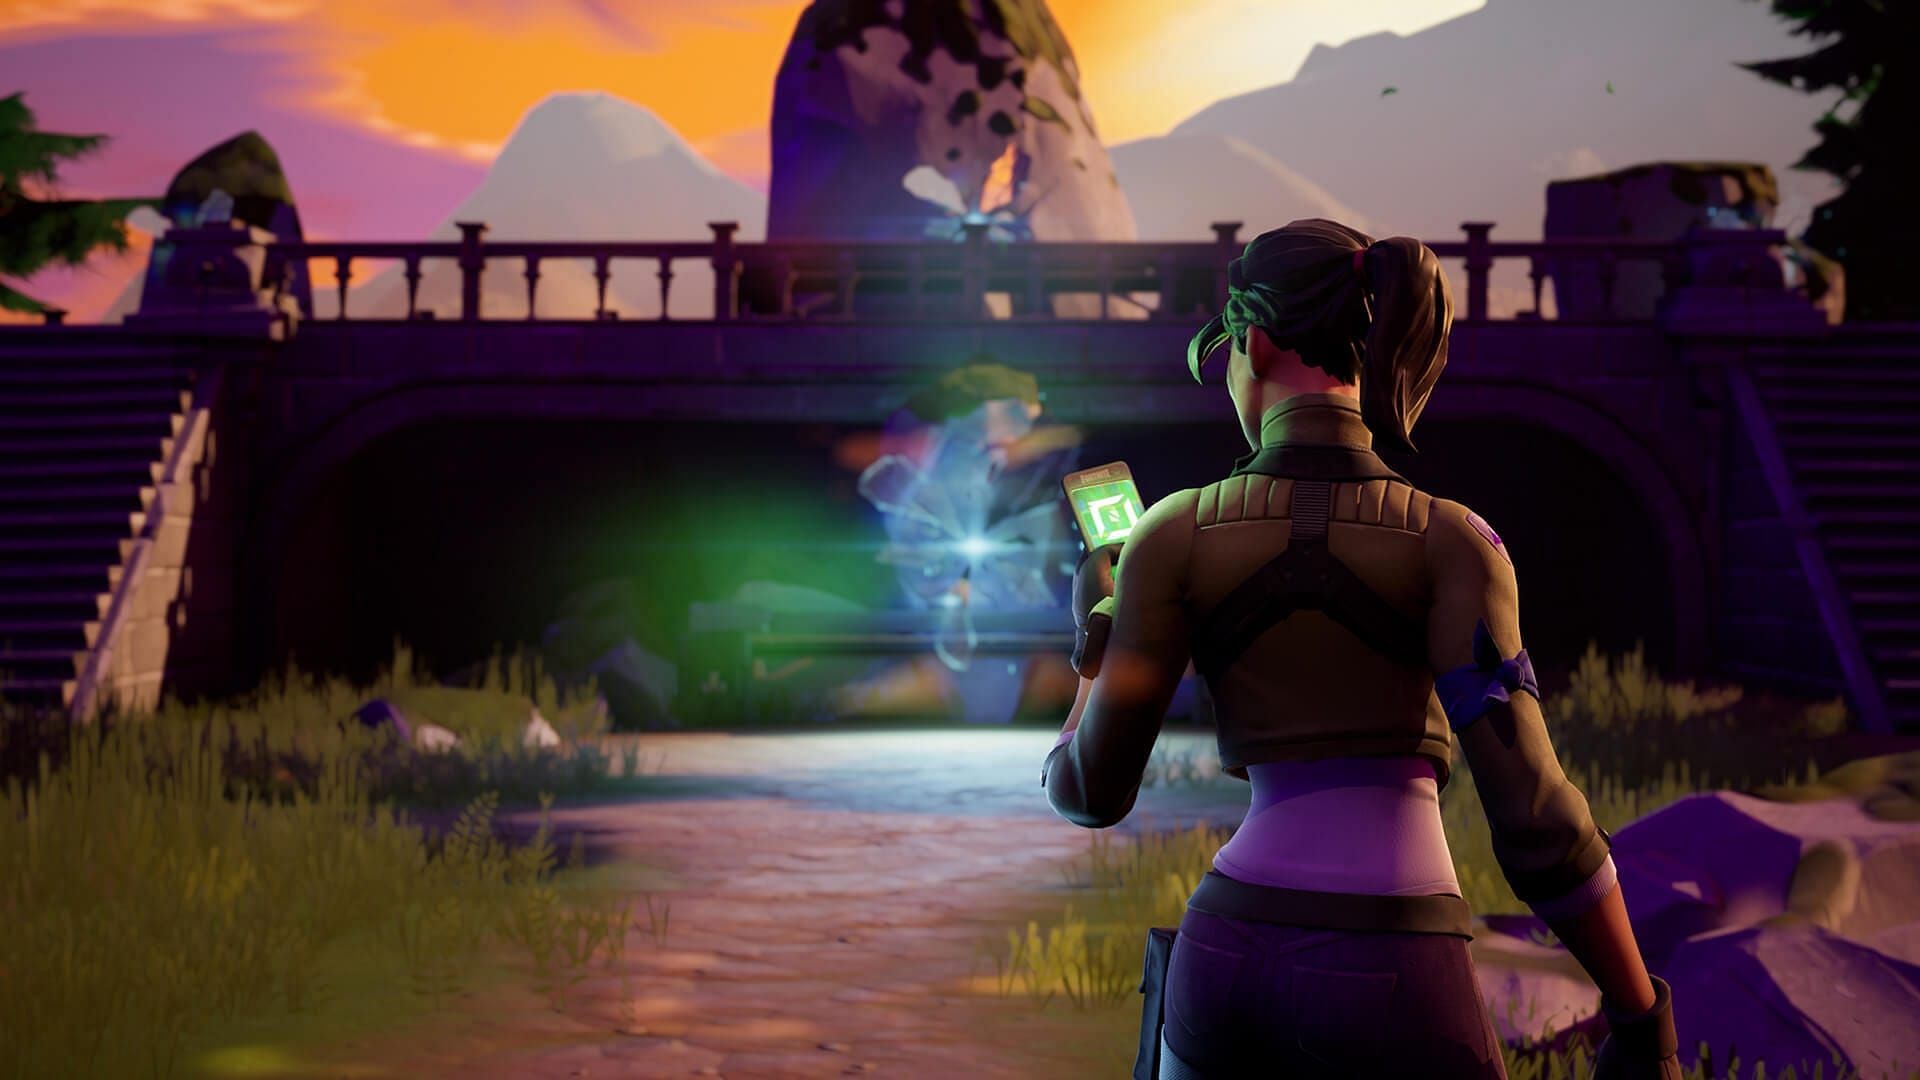 Creative 2.0 will completely change Fortnite (Image via Epic Games)